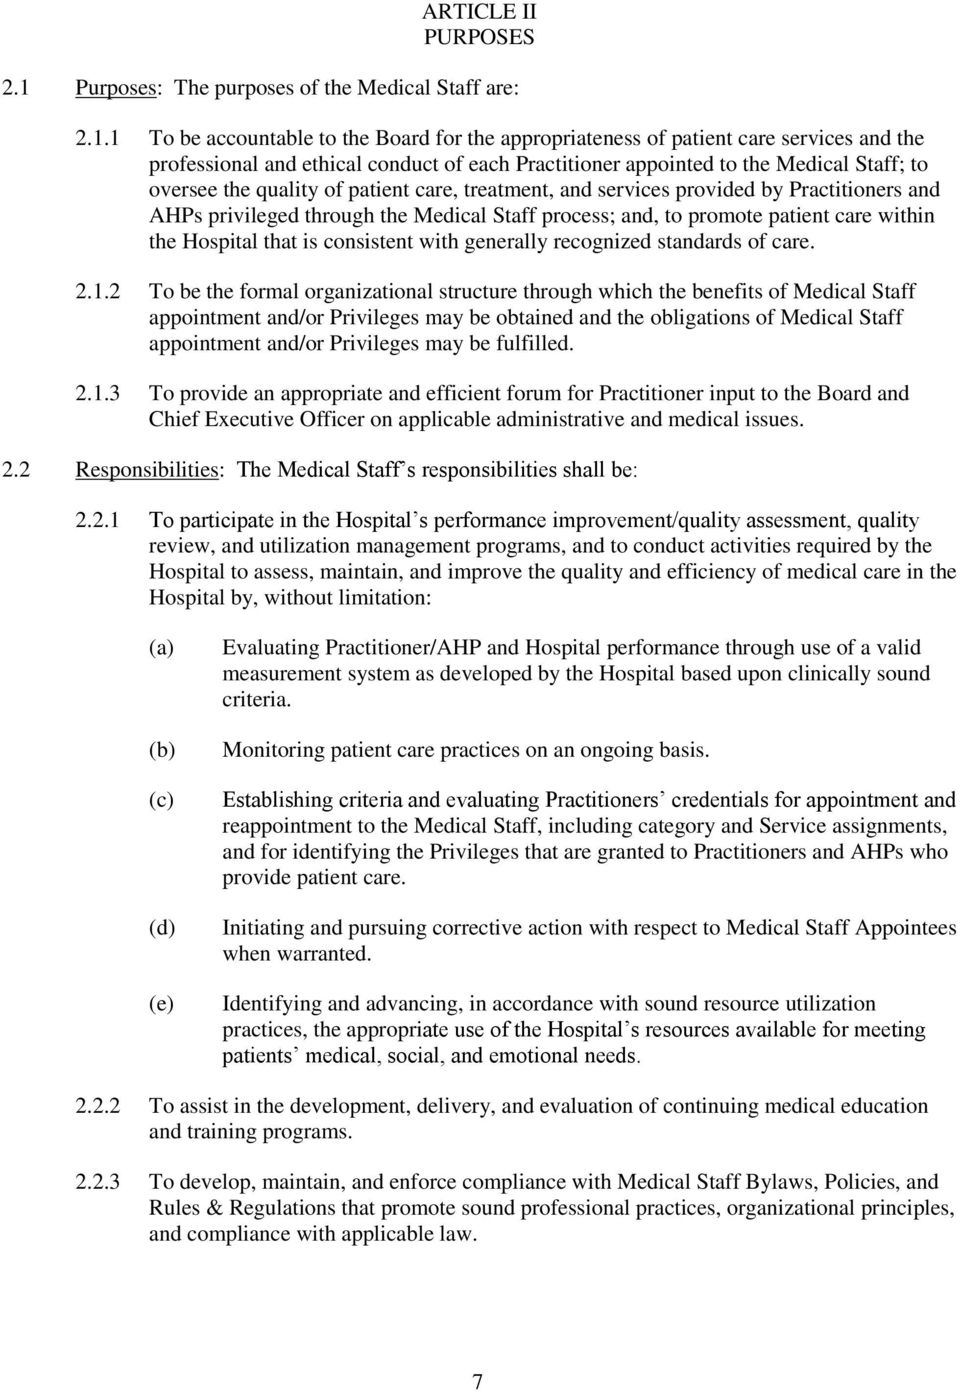 1 To be accountable to the Board for the appropriateness of patient care services and the professional and ethical conduct of each Practitioner appointed to the Medical Staff; to oversee the quality